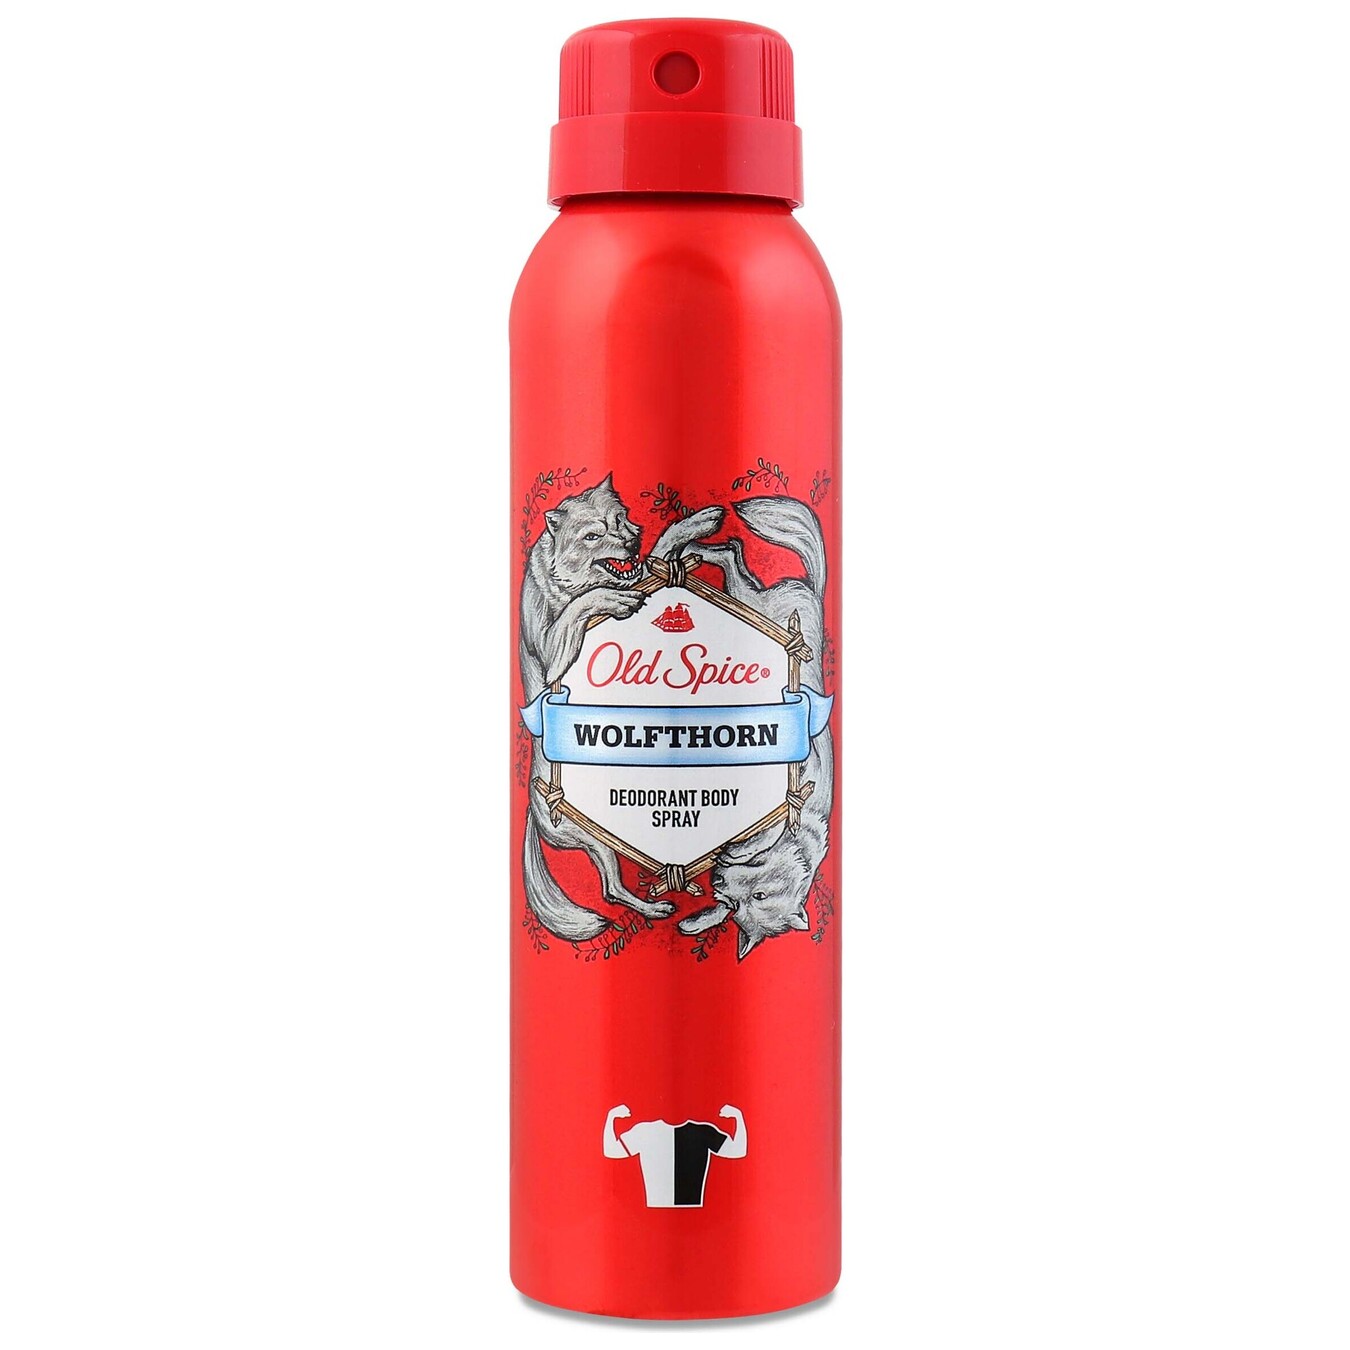 Old Spice Deodorant Wolfthorn 150 ml Buy at a good price from Novus